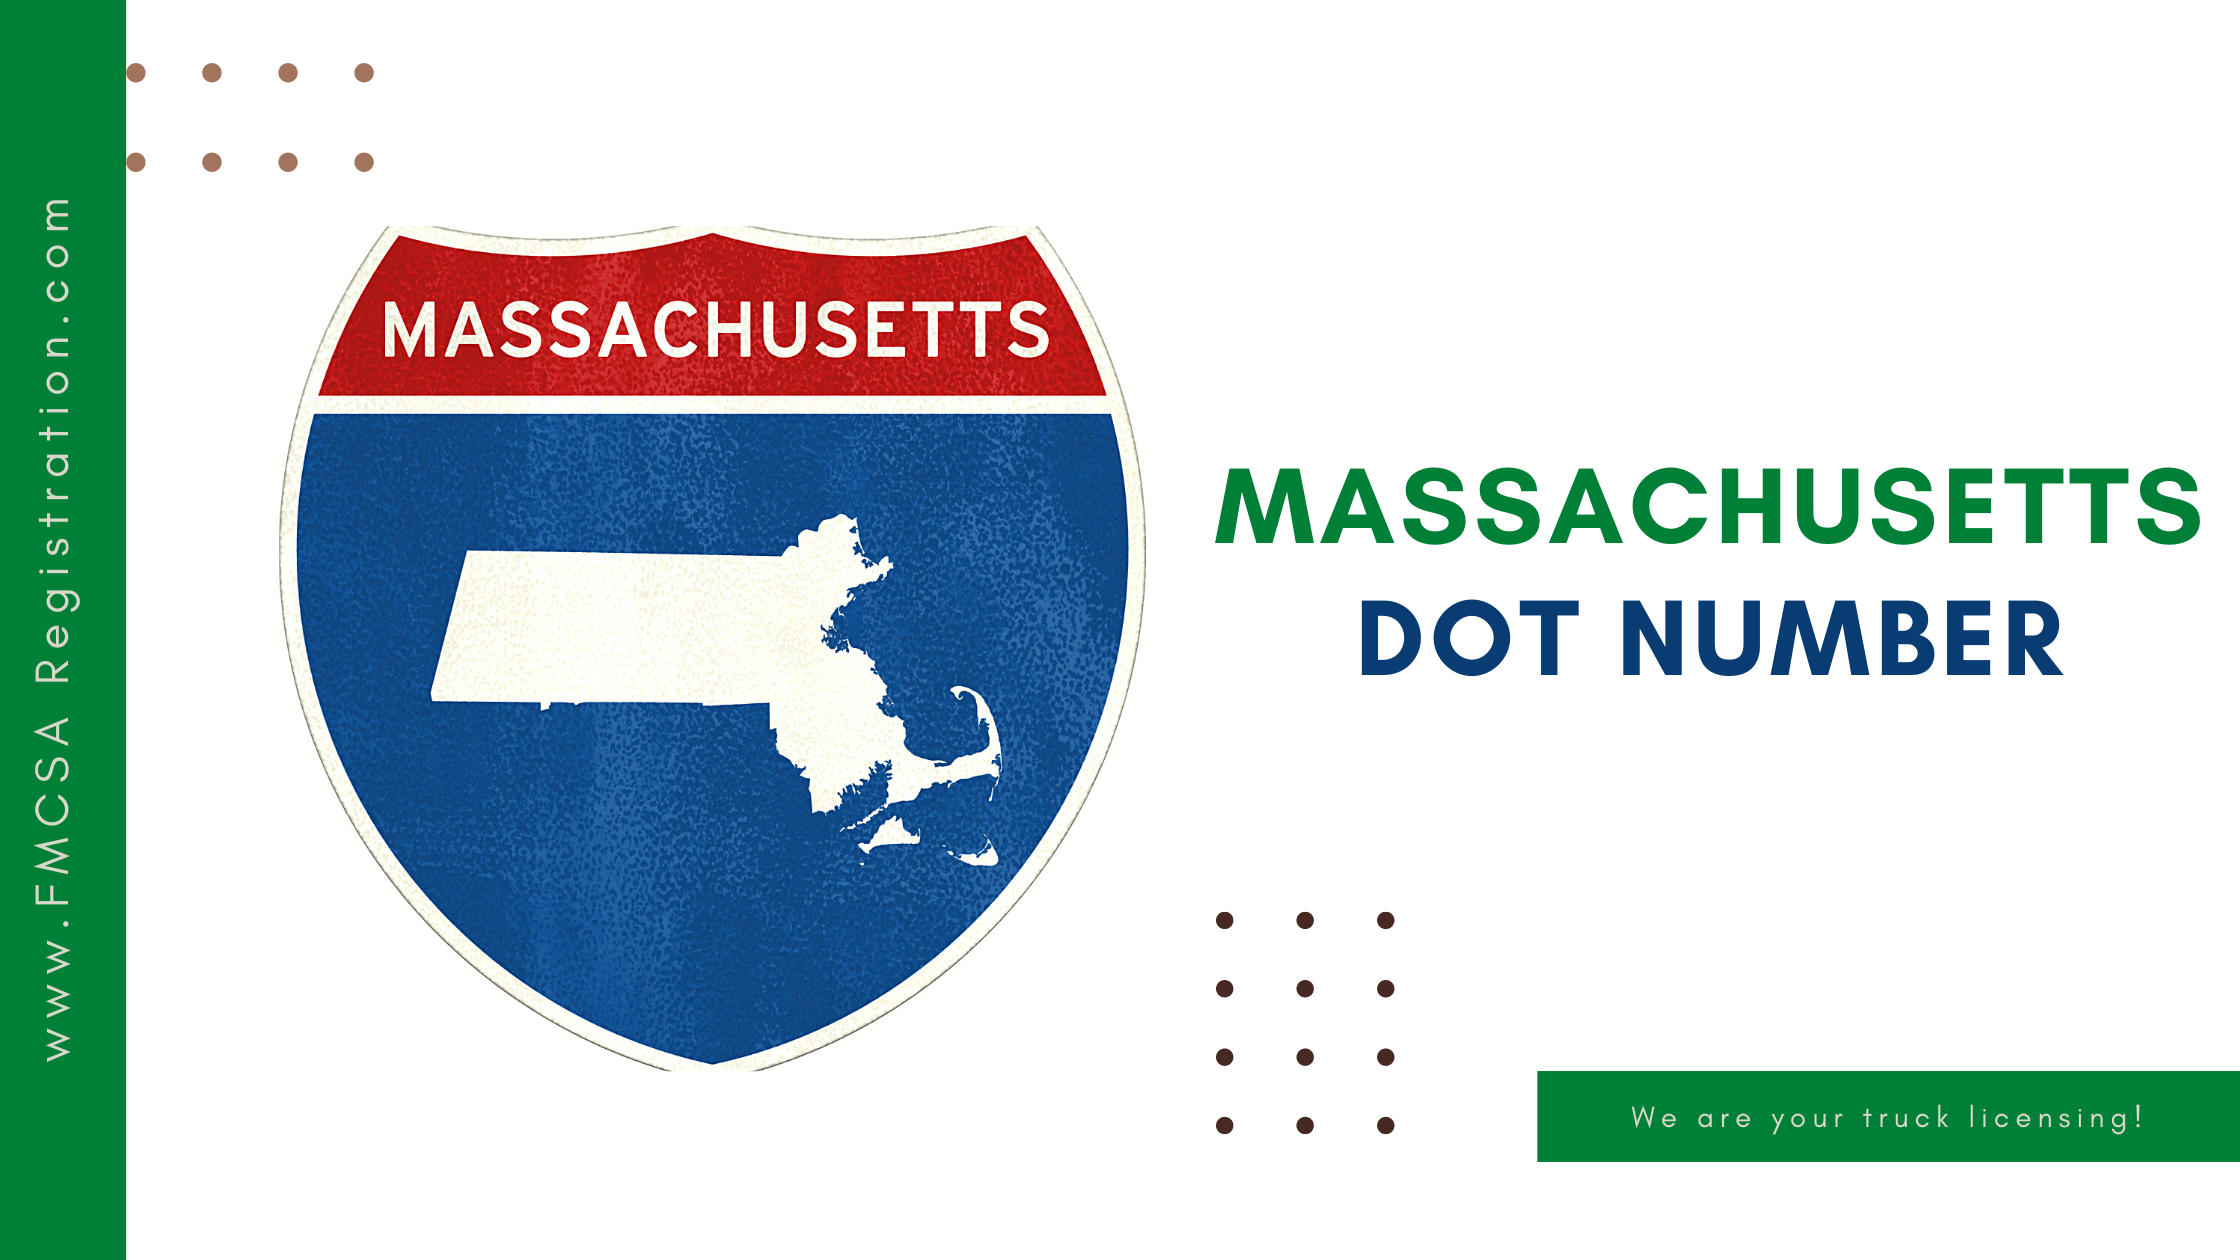 Massachusetts DOT Number product image reference 1